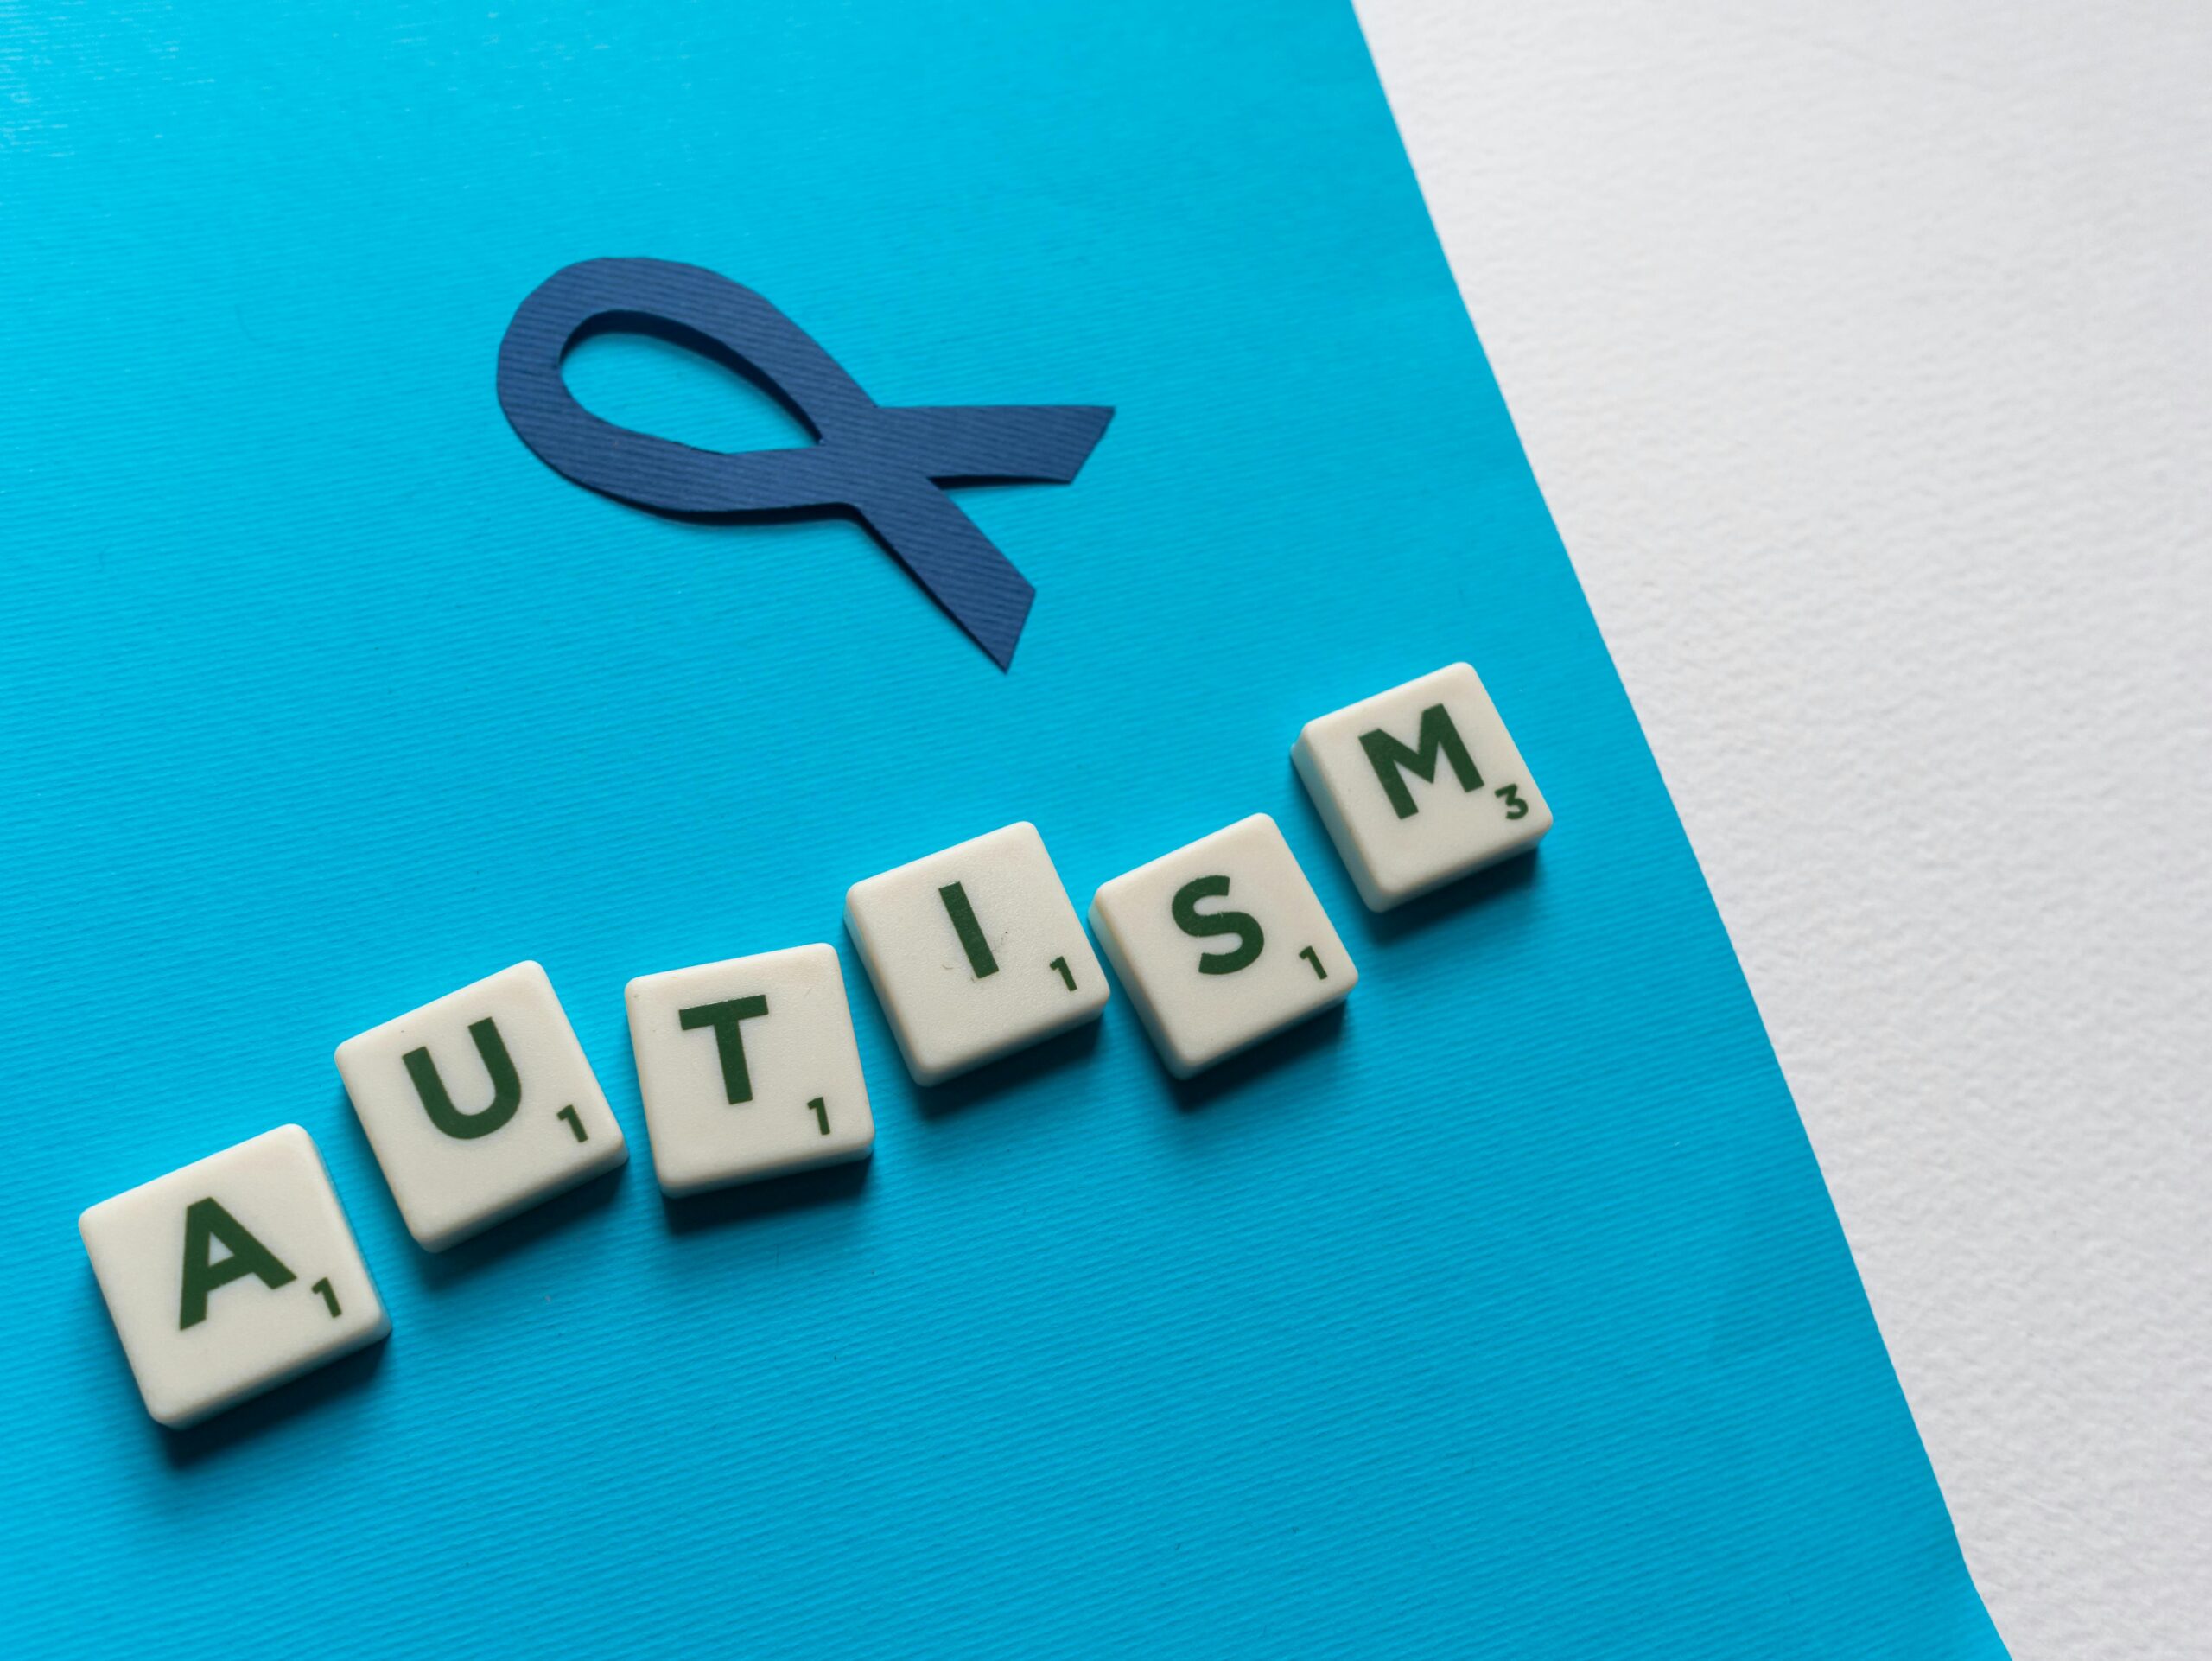 Finding Help for Autism Disorder